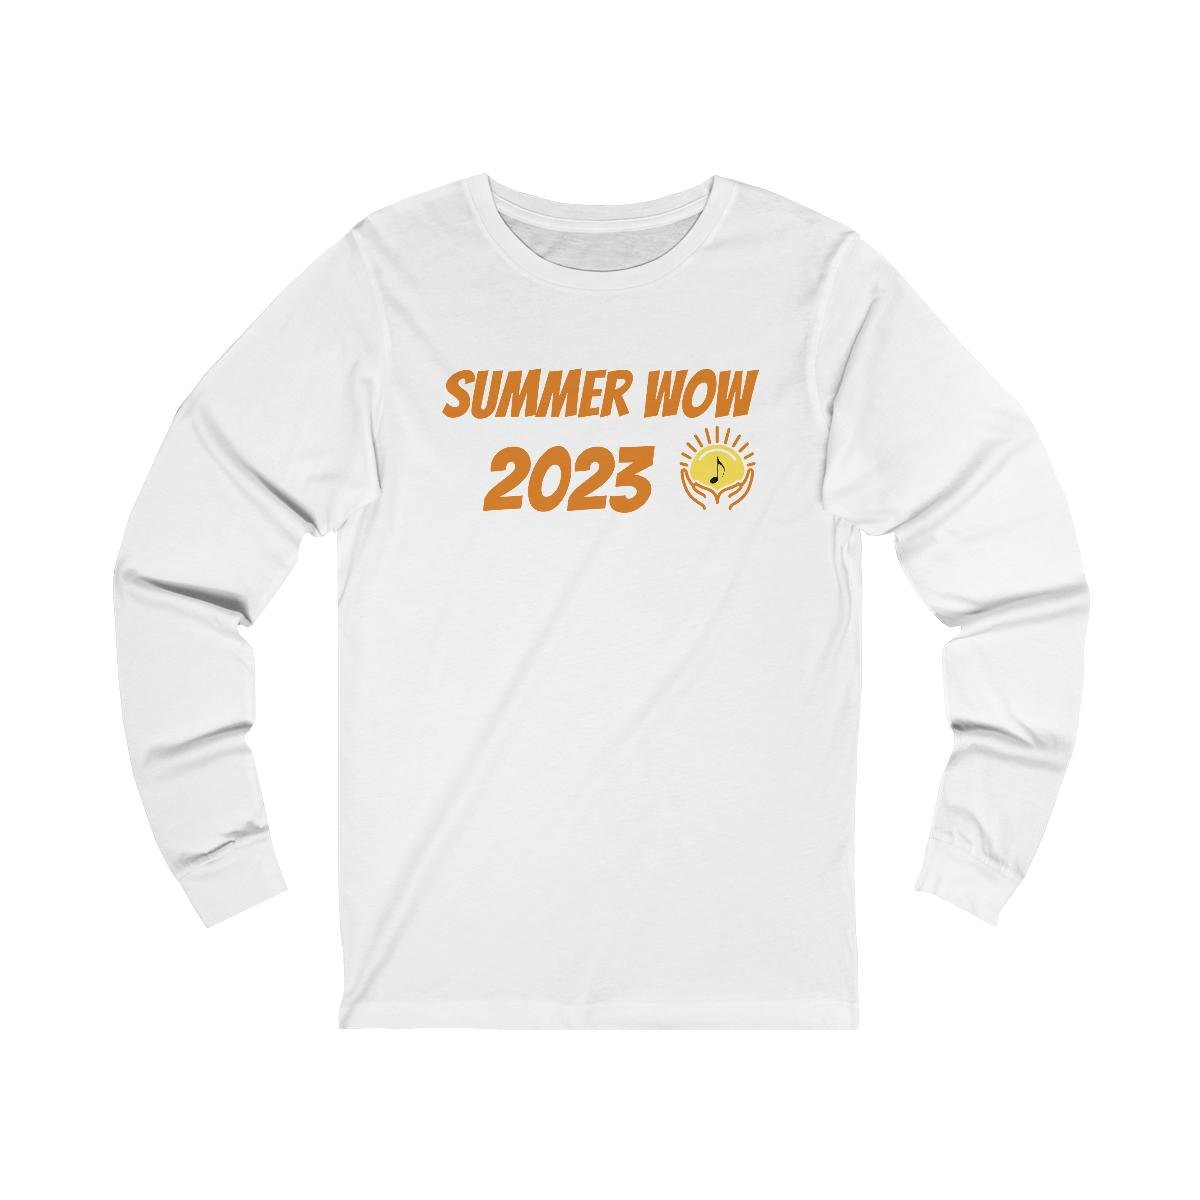 Worship On The Waterfront – Summer WOW 2023 Long Sleeve Tshirt